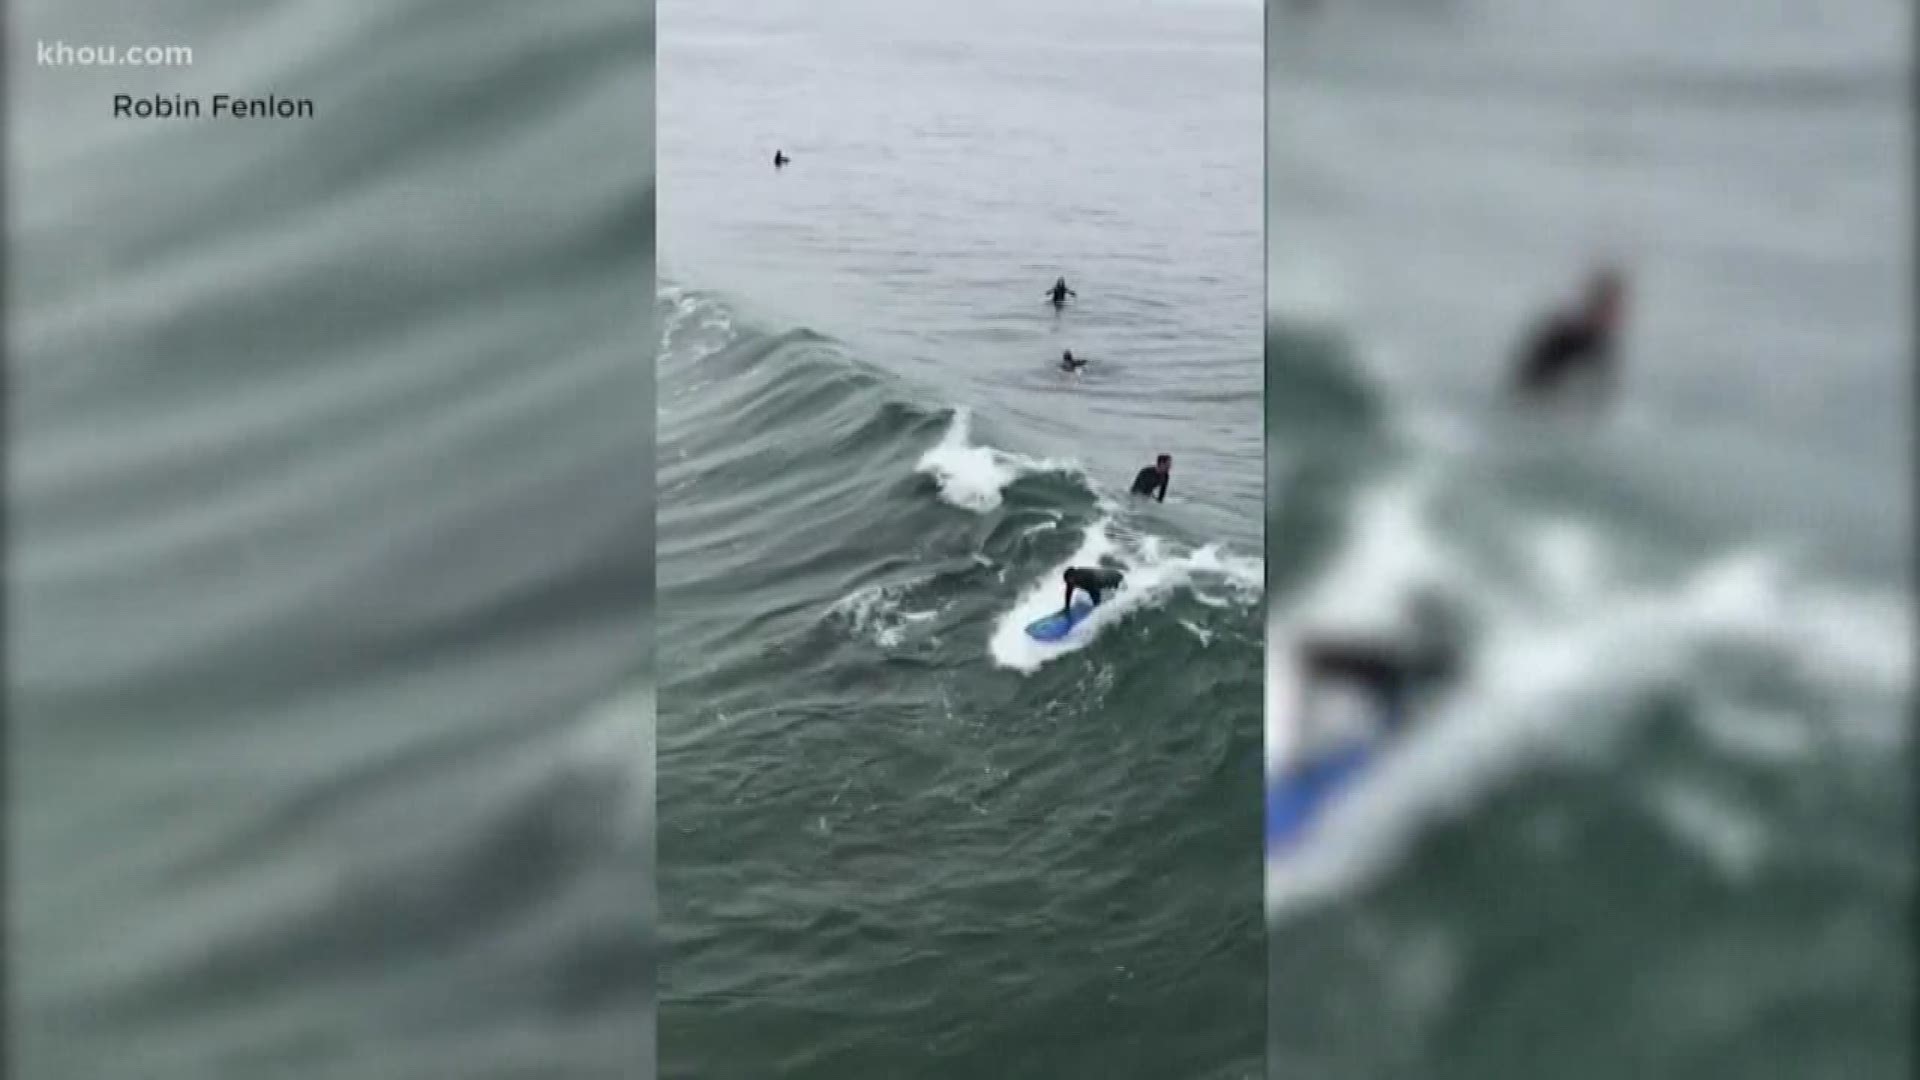 Swimming with dolphins is great but what happened off the coast of California is truly remarkable. Manhattan beach boarders and surfers got an unexpected play date with a pod of pacific bottle nose dolphins.